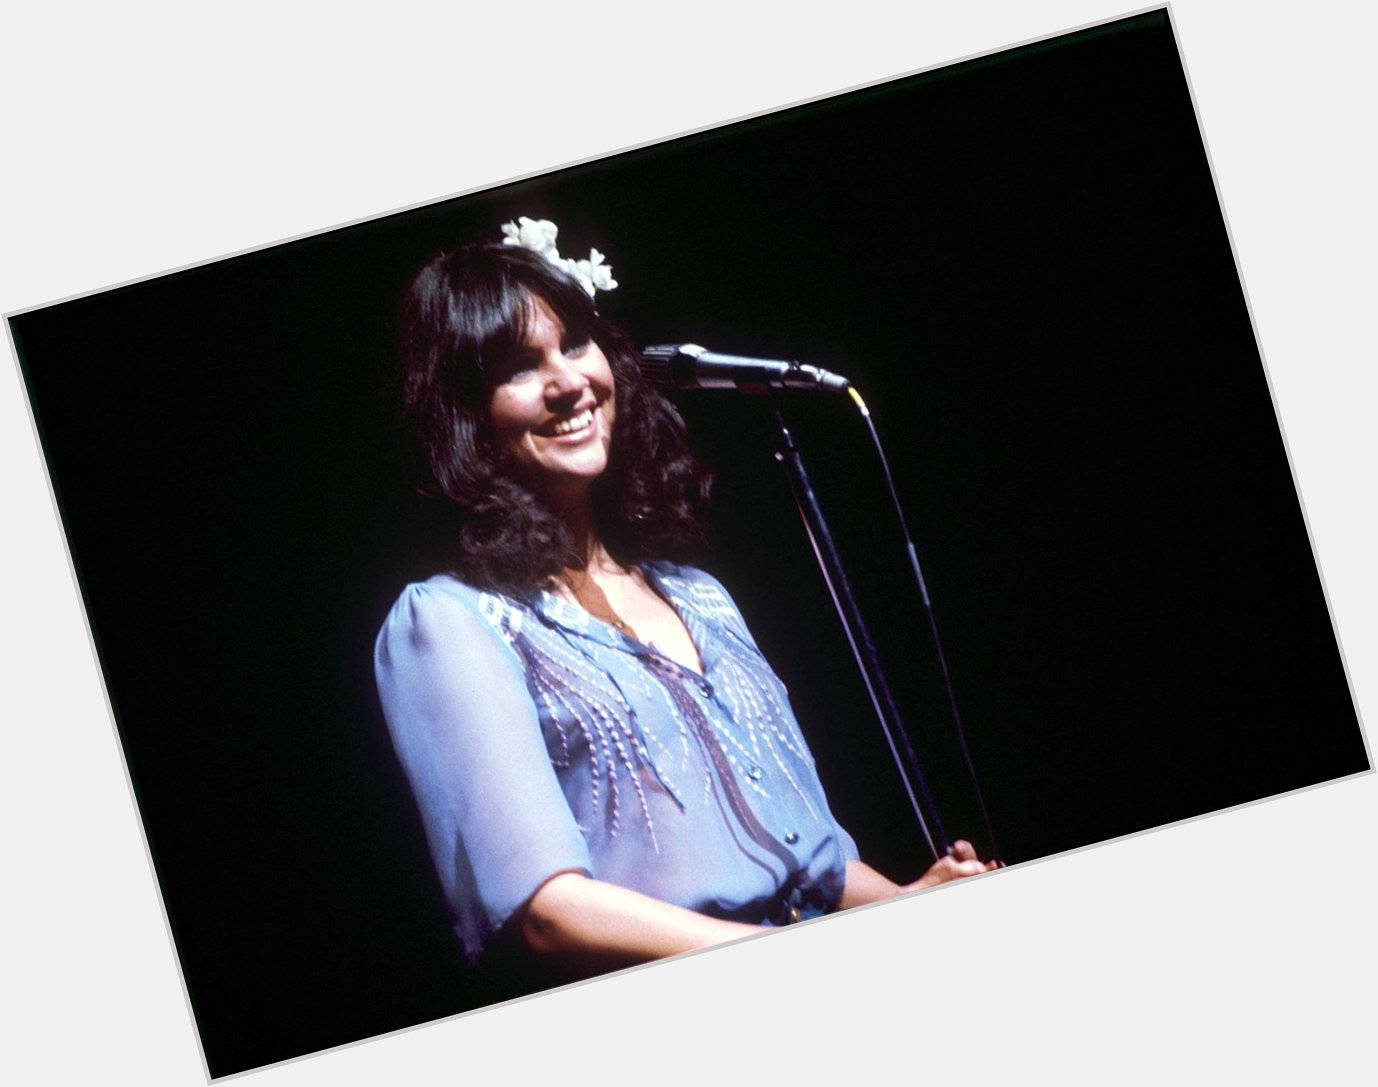 Happy birthday to the one, the only, the magnificent Linda Ronstadt. 